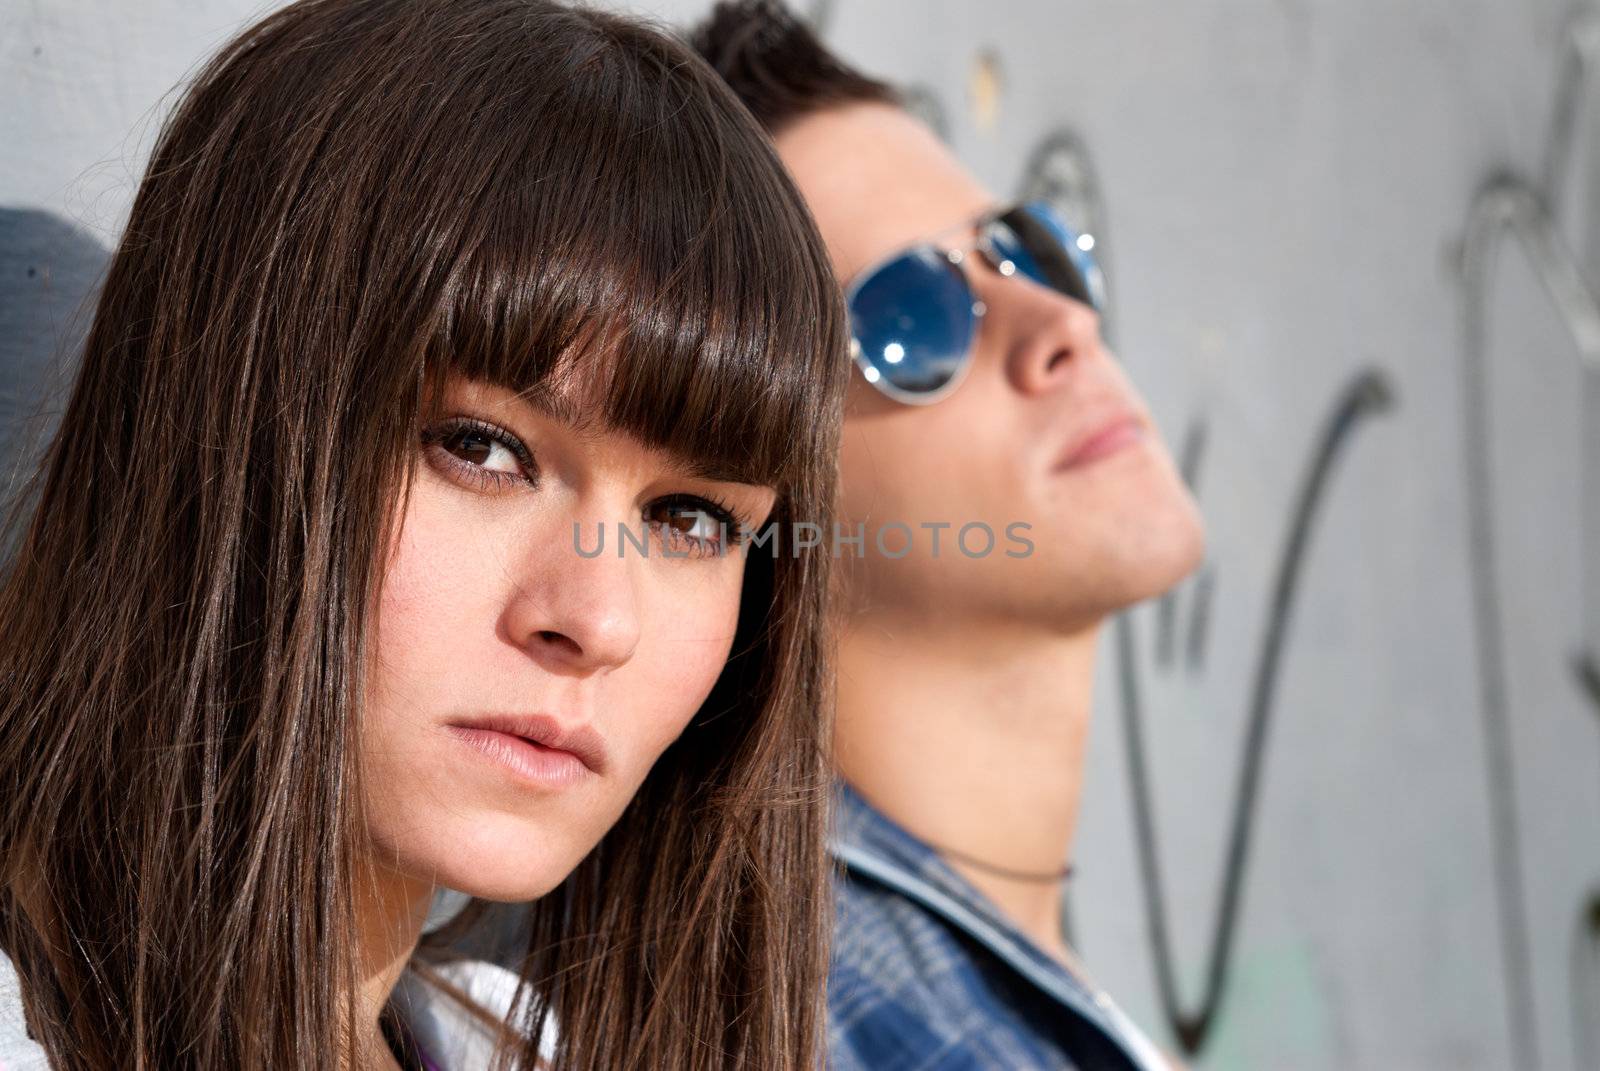 Young couple urban fashion close-up portrait focused on woman